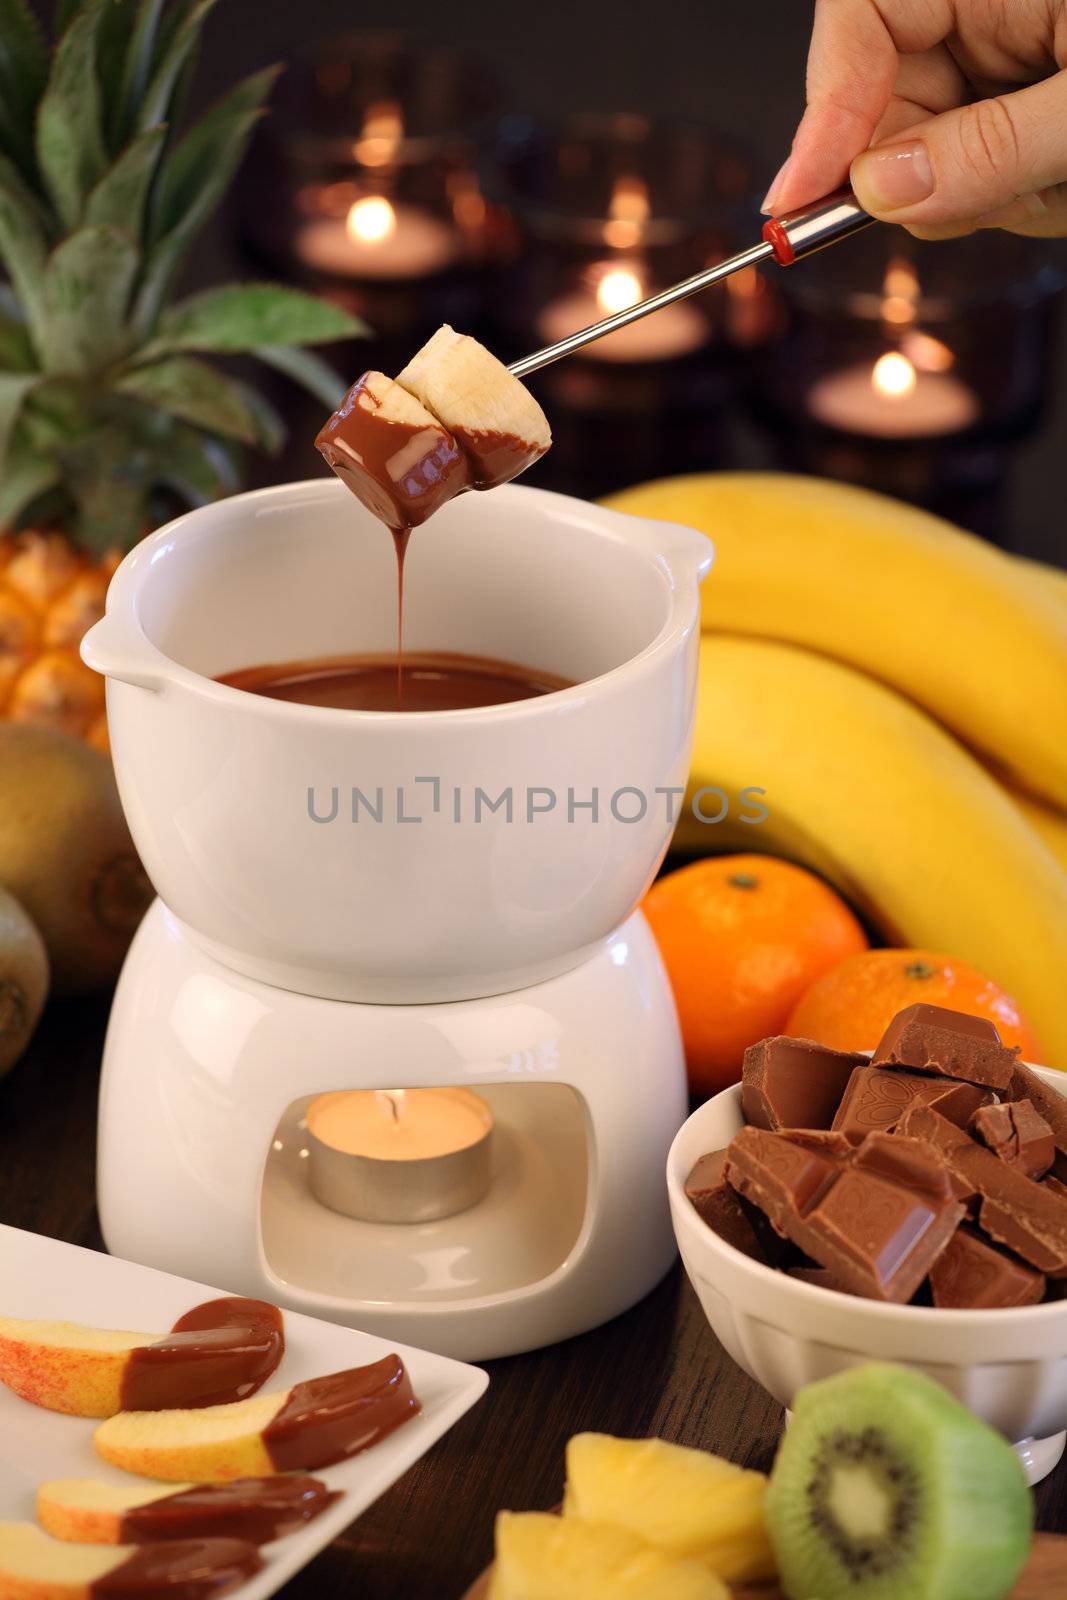 Photo of bananas being dipped into the bowl of the chocolate fondue. Selective focus on the bananas.